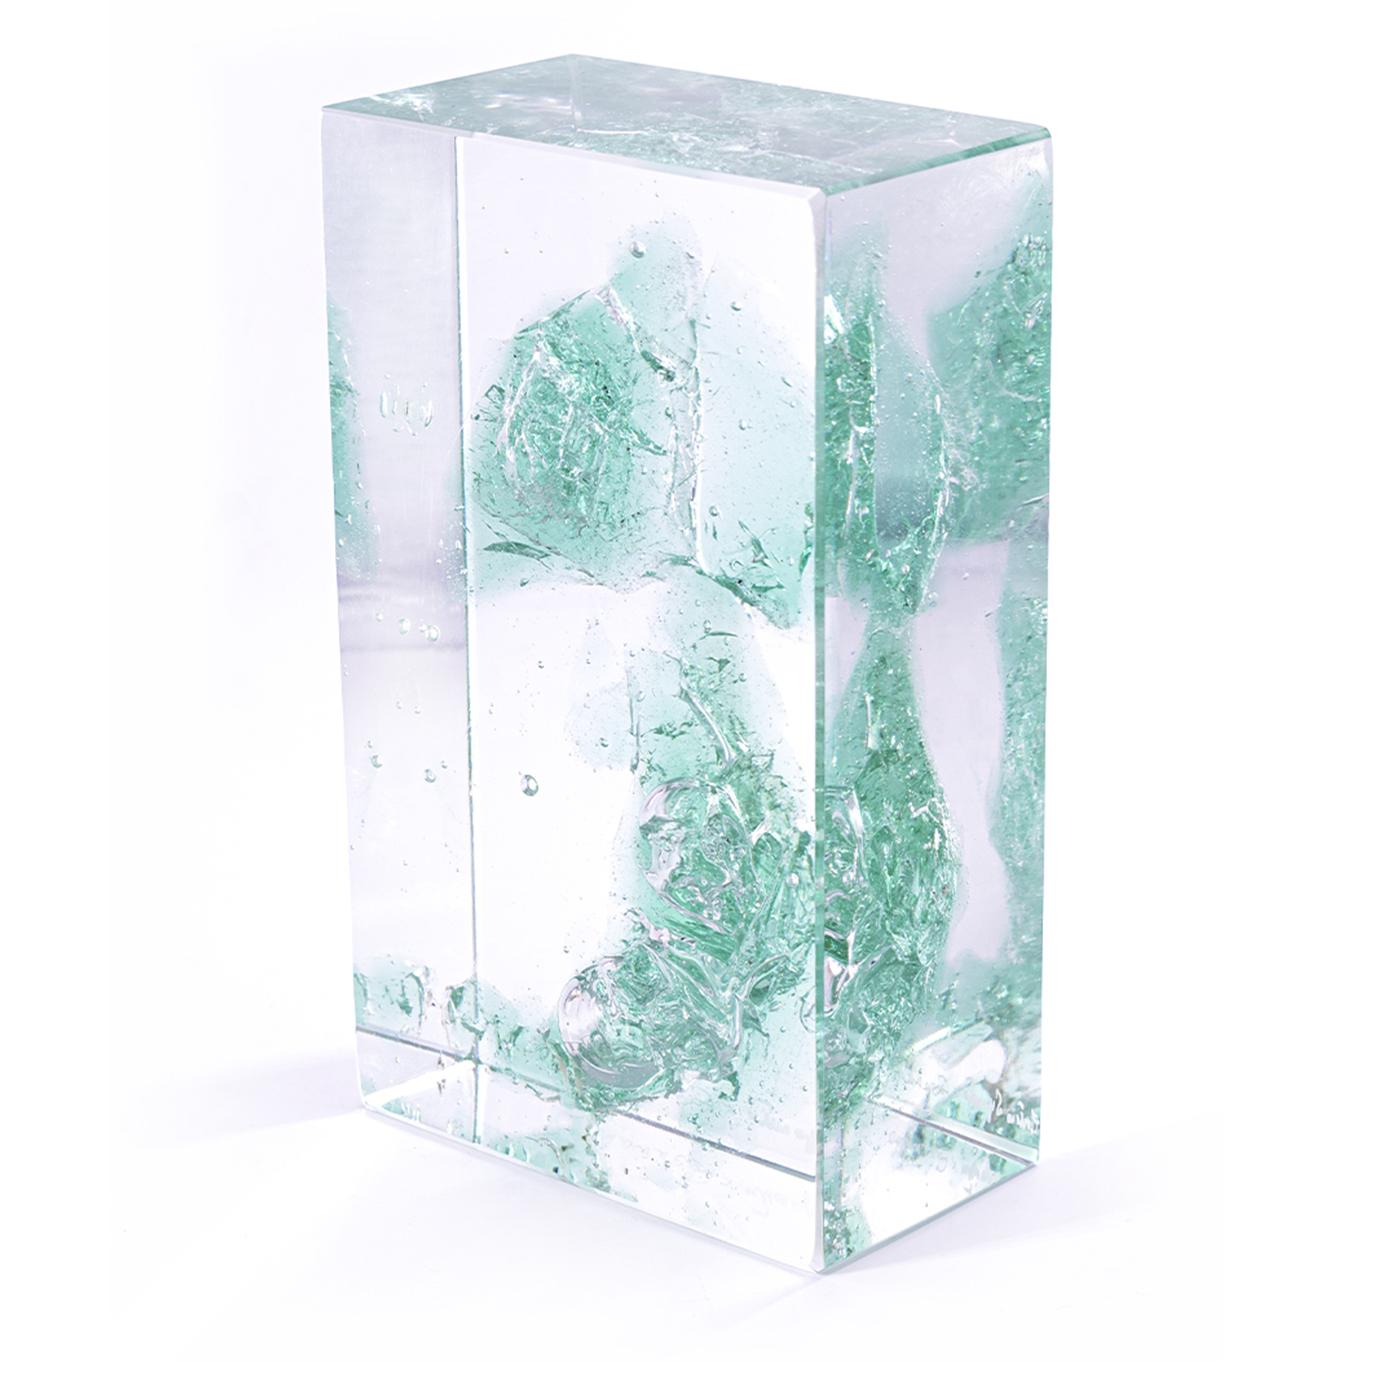 Cotisso Totem is a Murano glass block, pure and monochromatic, obtained by breaking the crucible at the end of the process of manufacturing the glass of a particular color. It is a handcrafted unique piece, part of the Casarialto Atelier project.